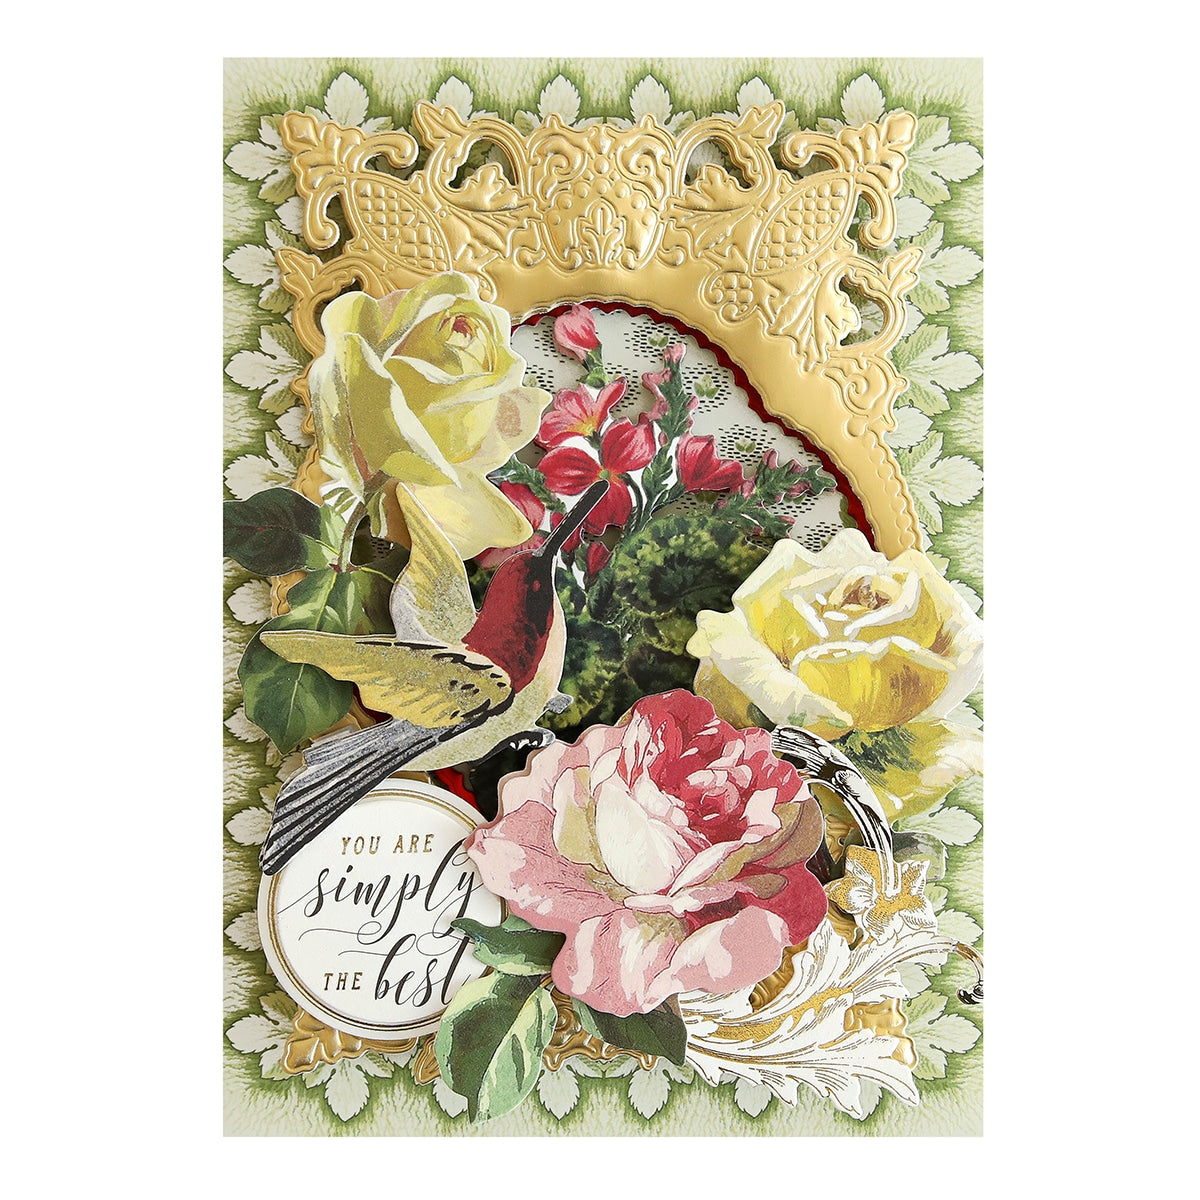 a card with flowers and a bird on it.